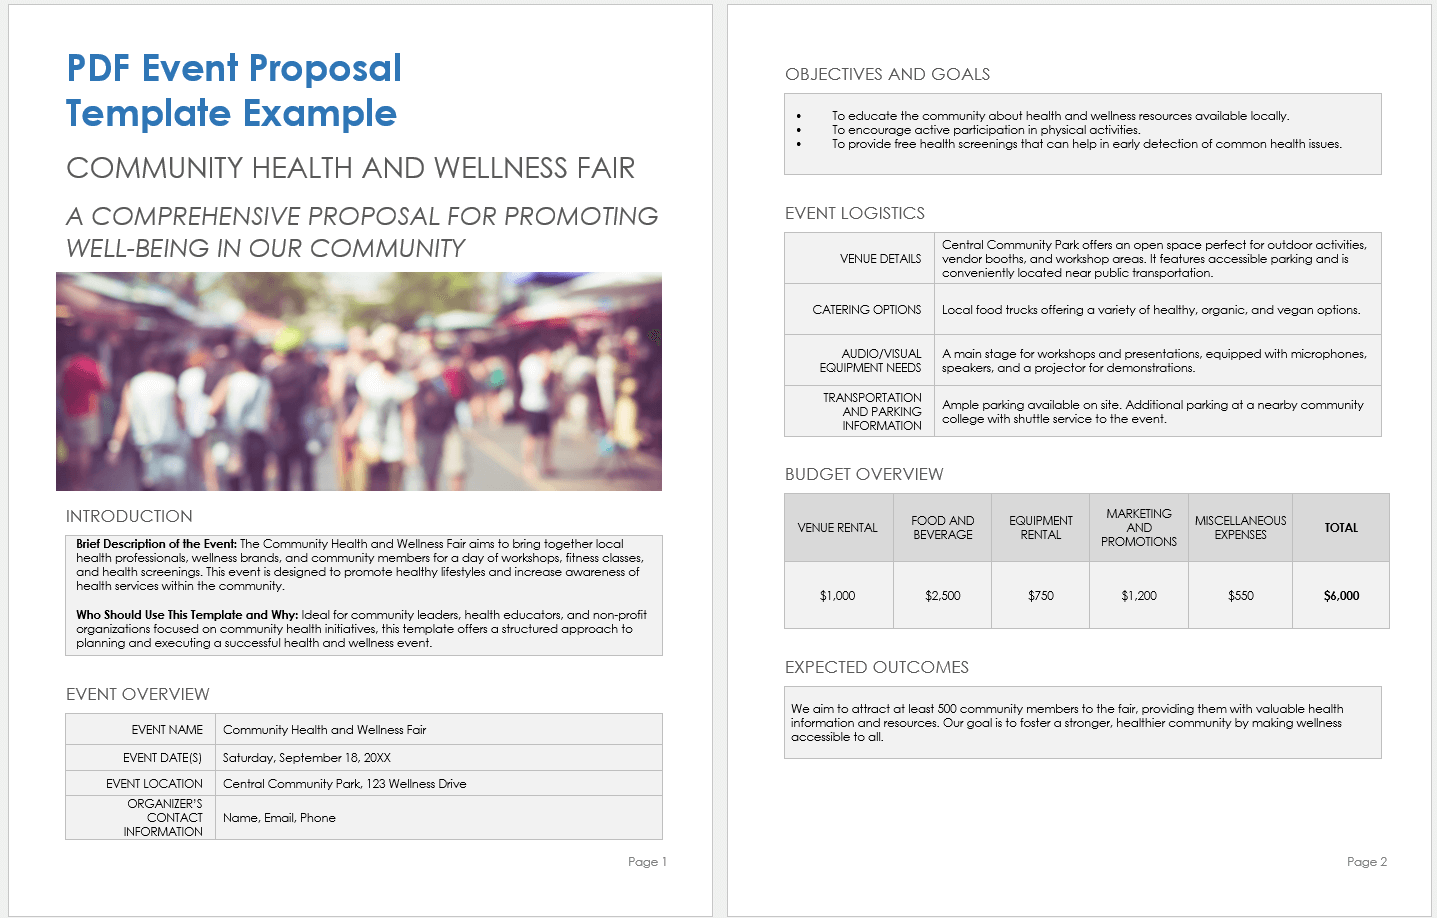 PDF Event Proposal Template Example